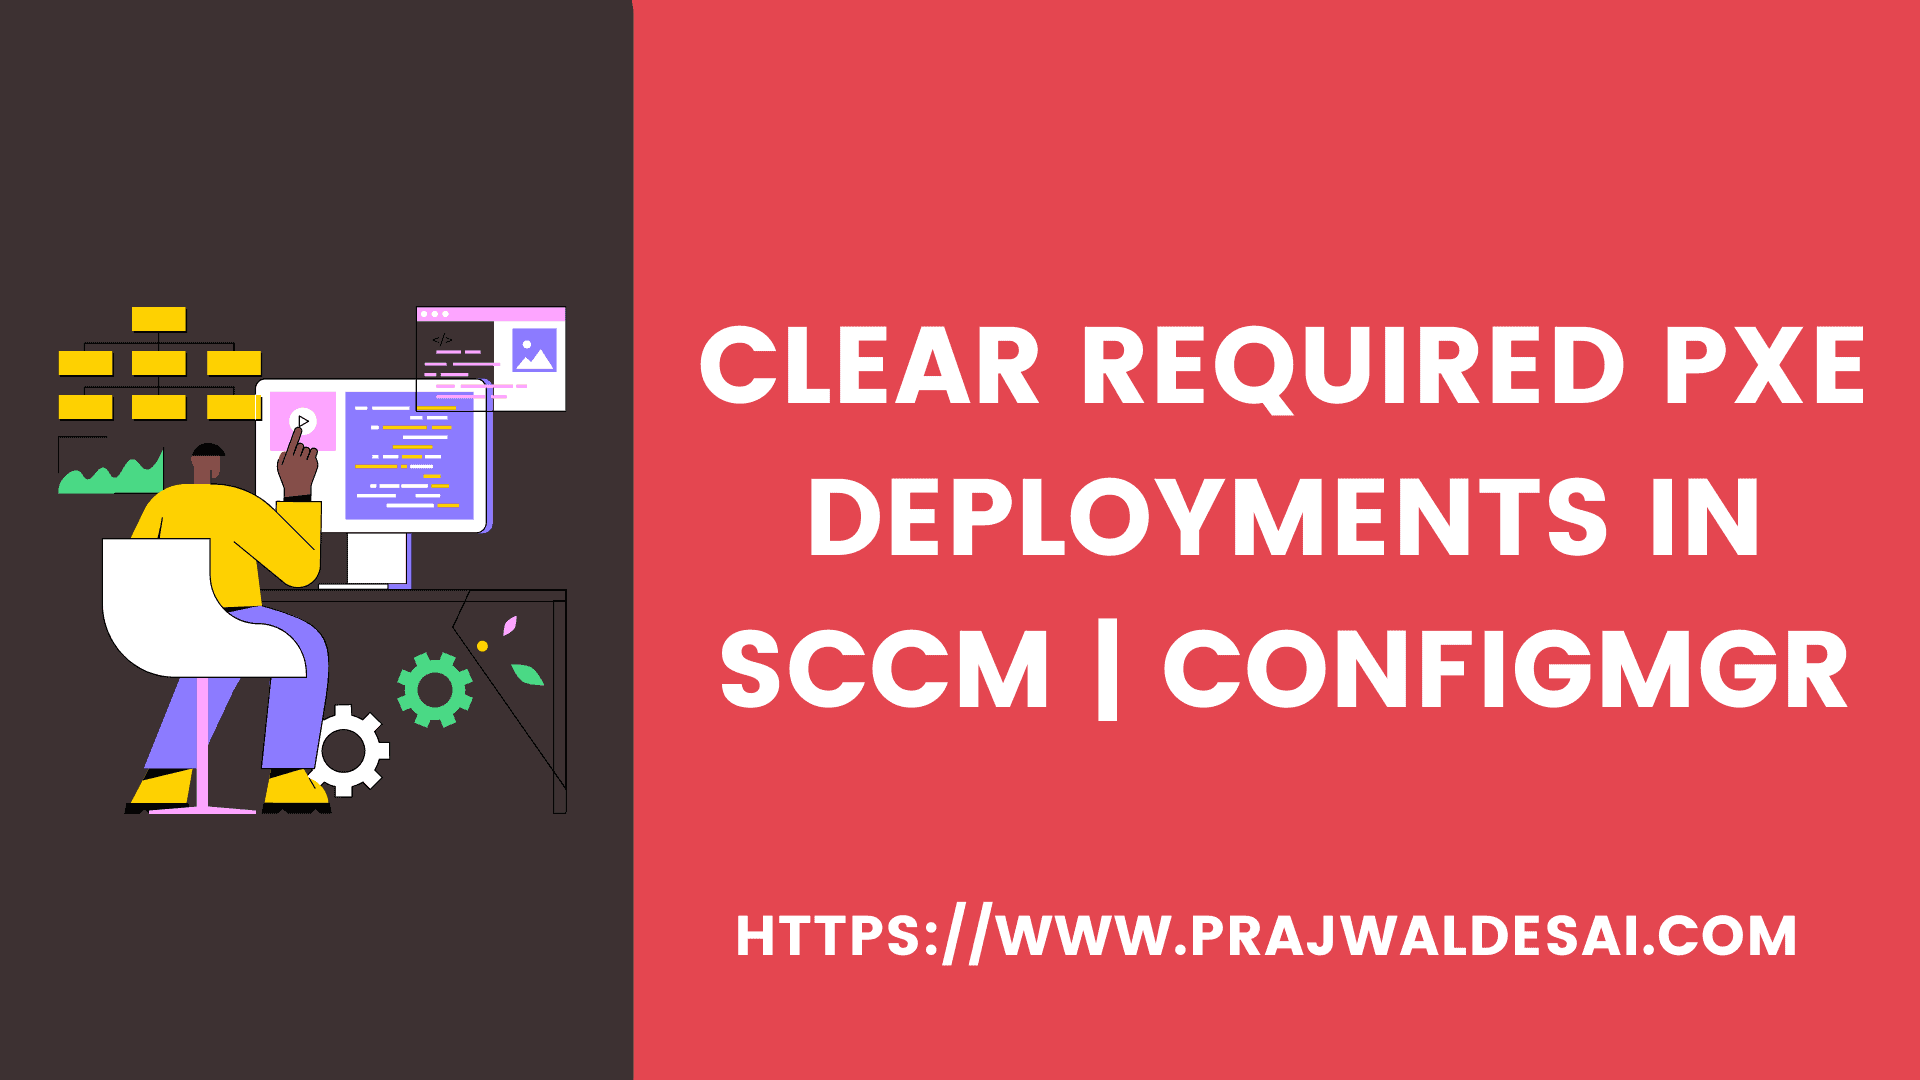 Clear Required PXE Deployments in SCCM